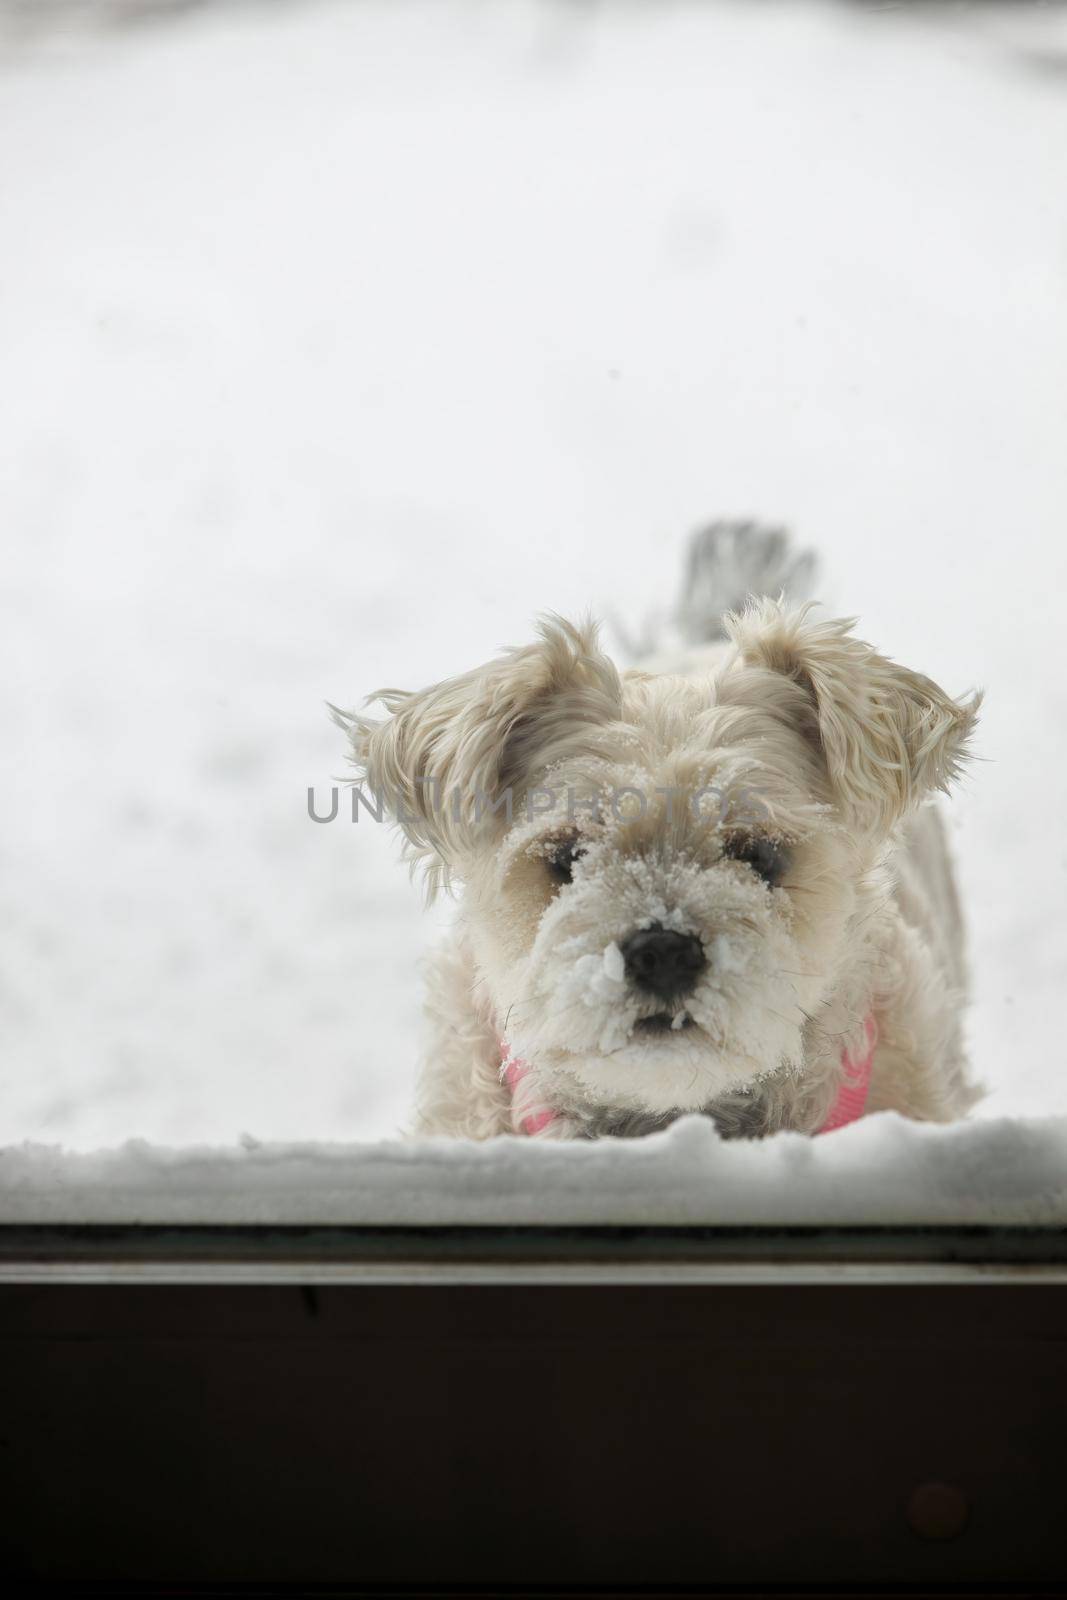 Snow Covered Dog Waiting to Come Inside by markvandam